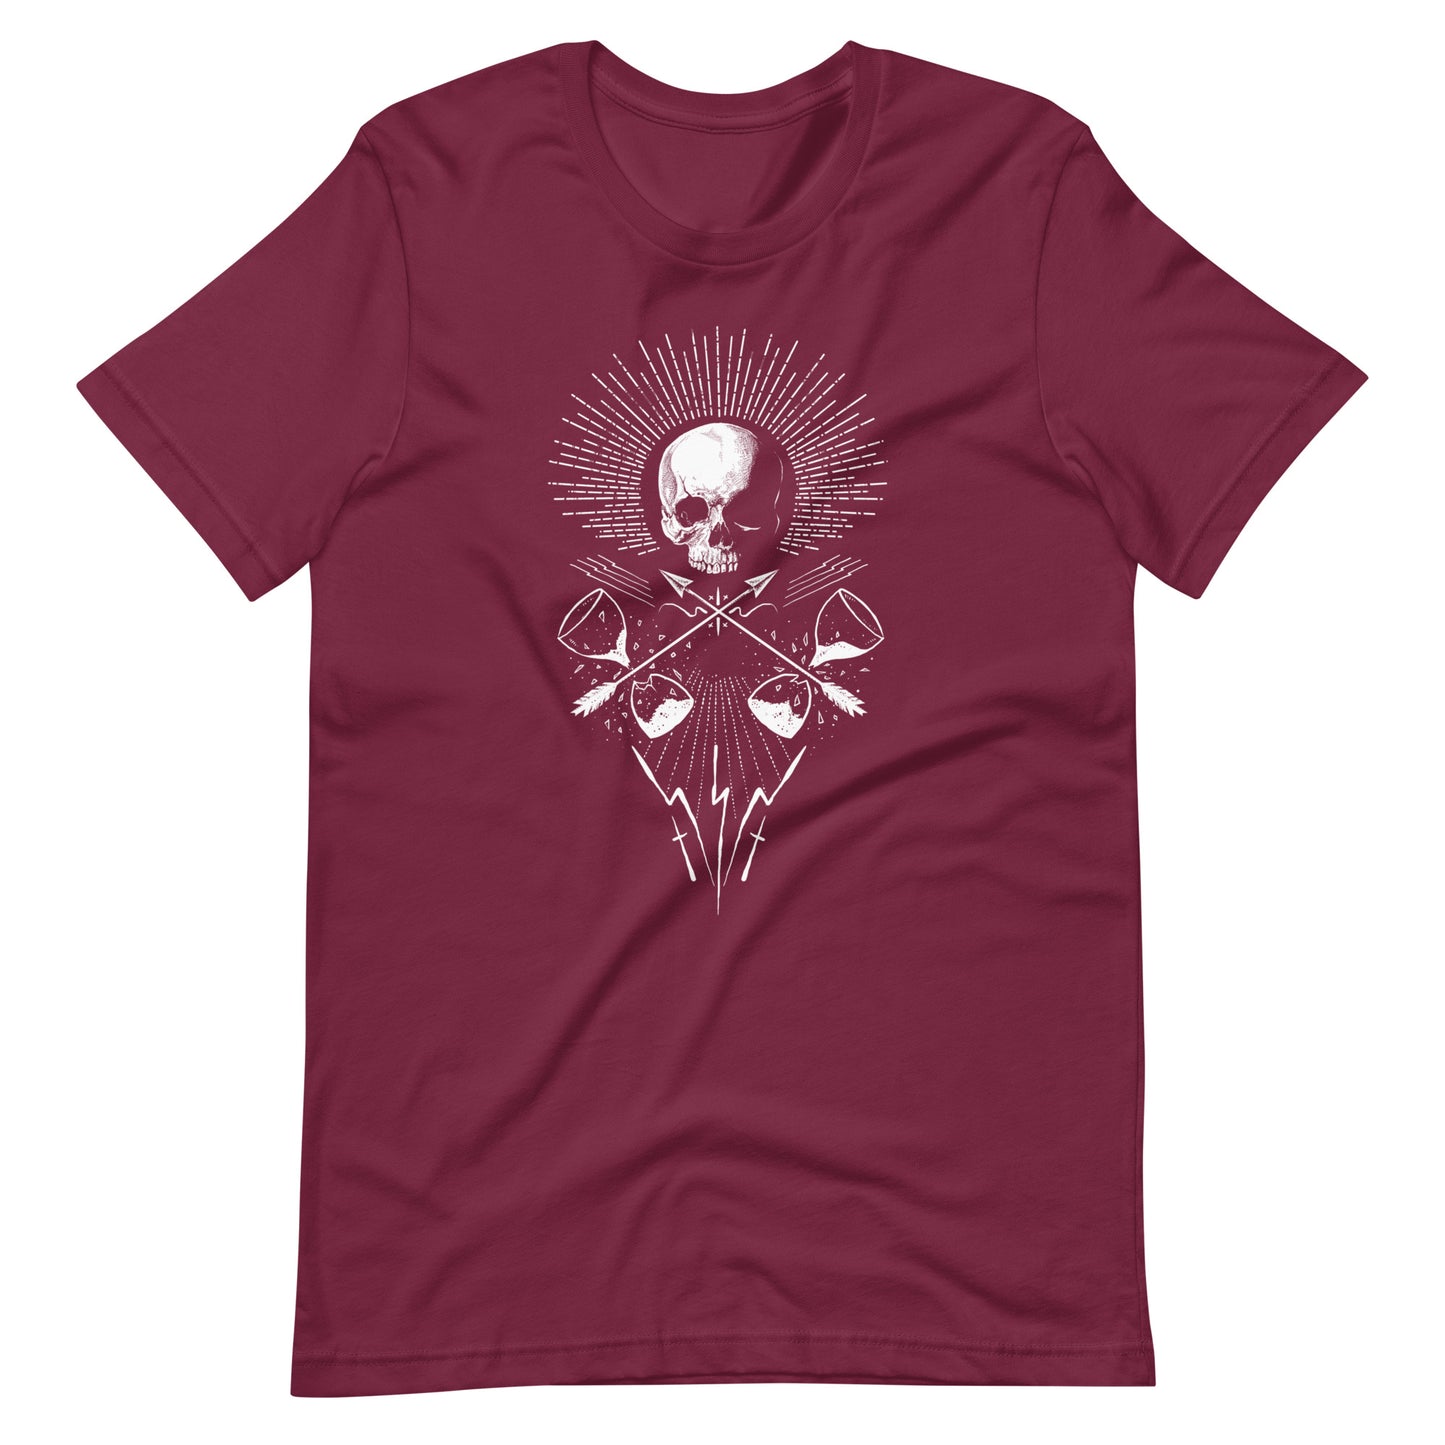 For the Sake of Future - Men's t-shirt - Maroon Front